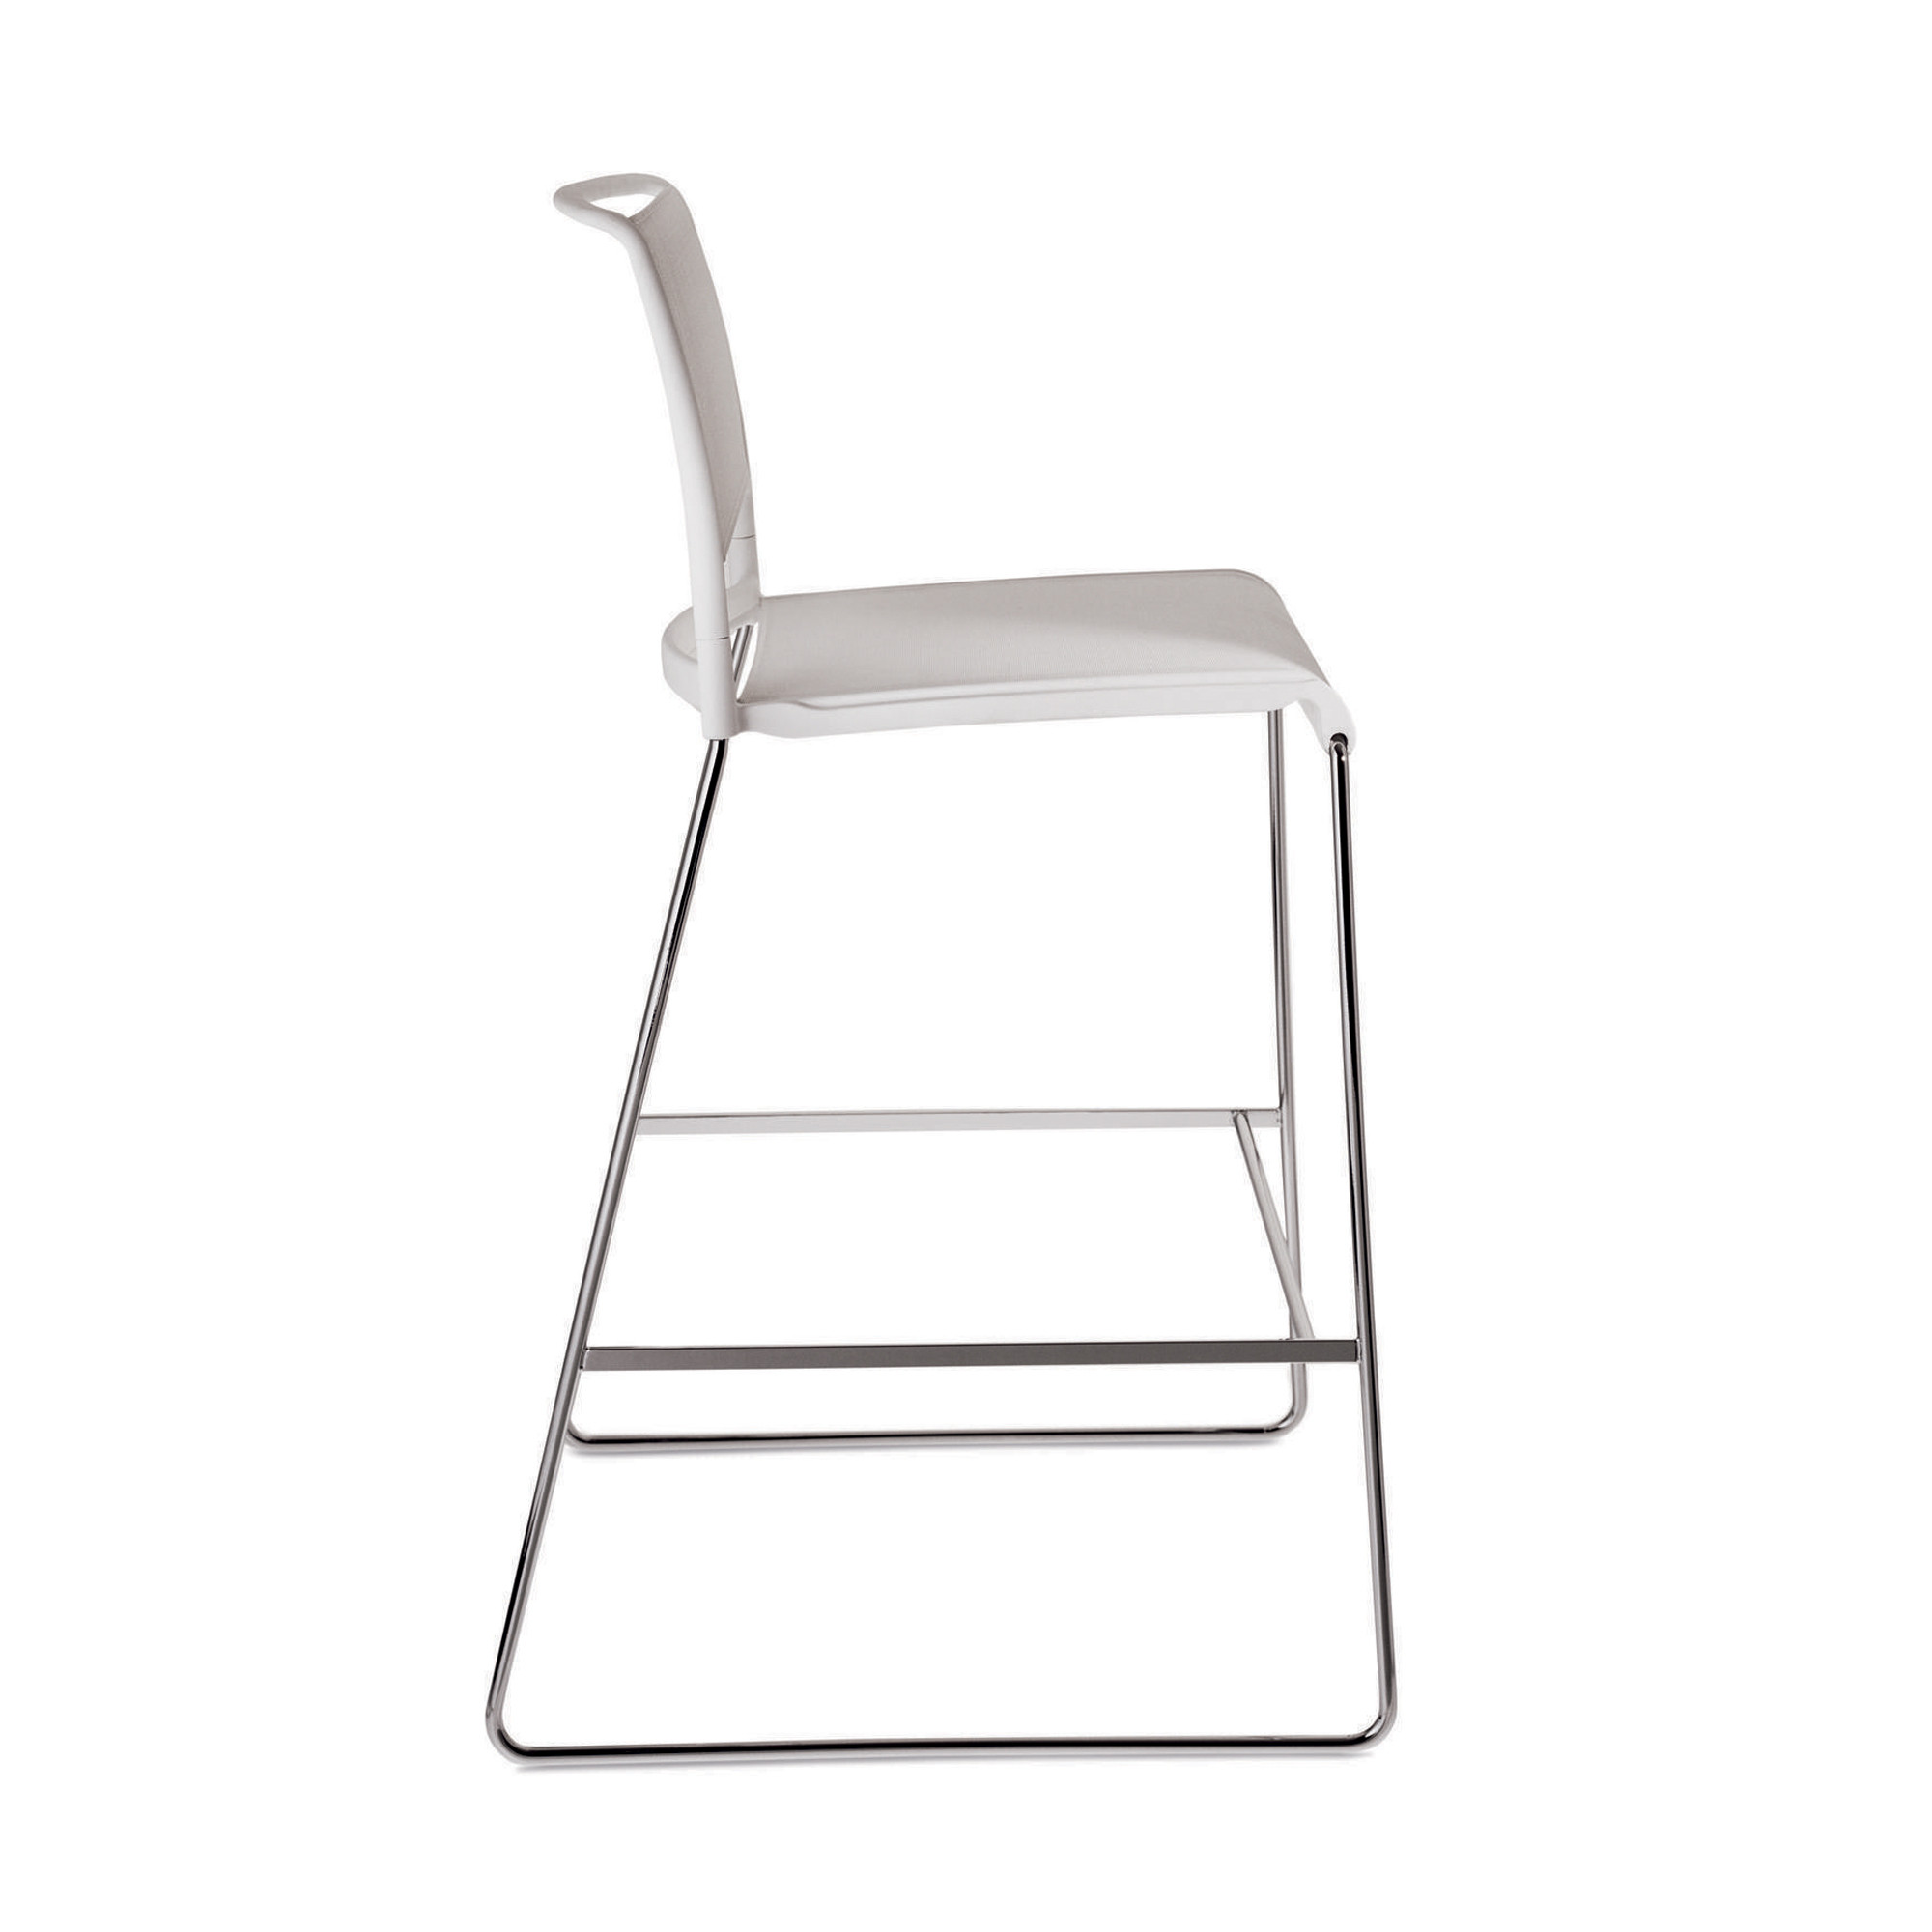 Aline Bar Stool features backrest and footrest bar for great comfort